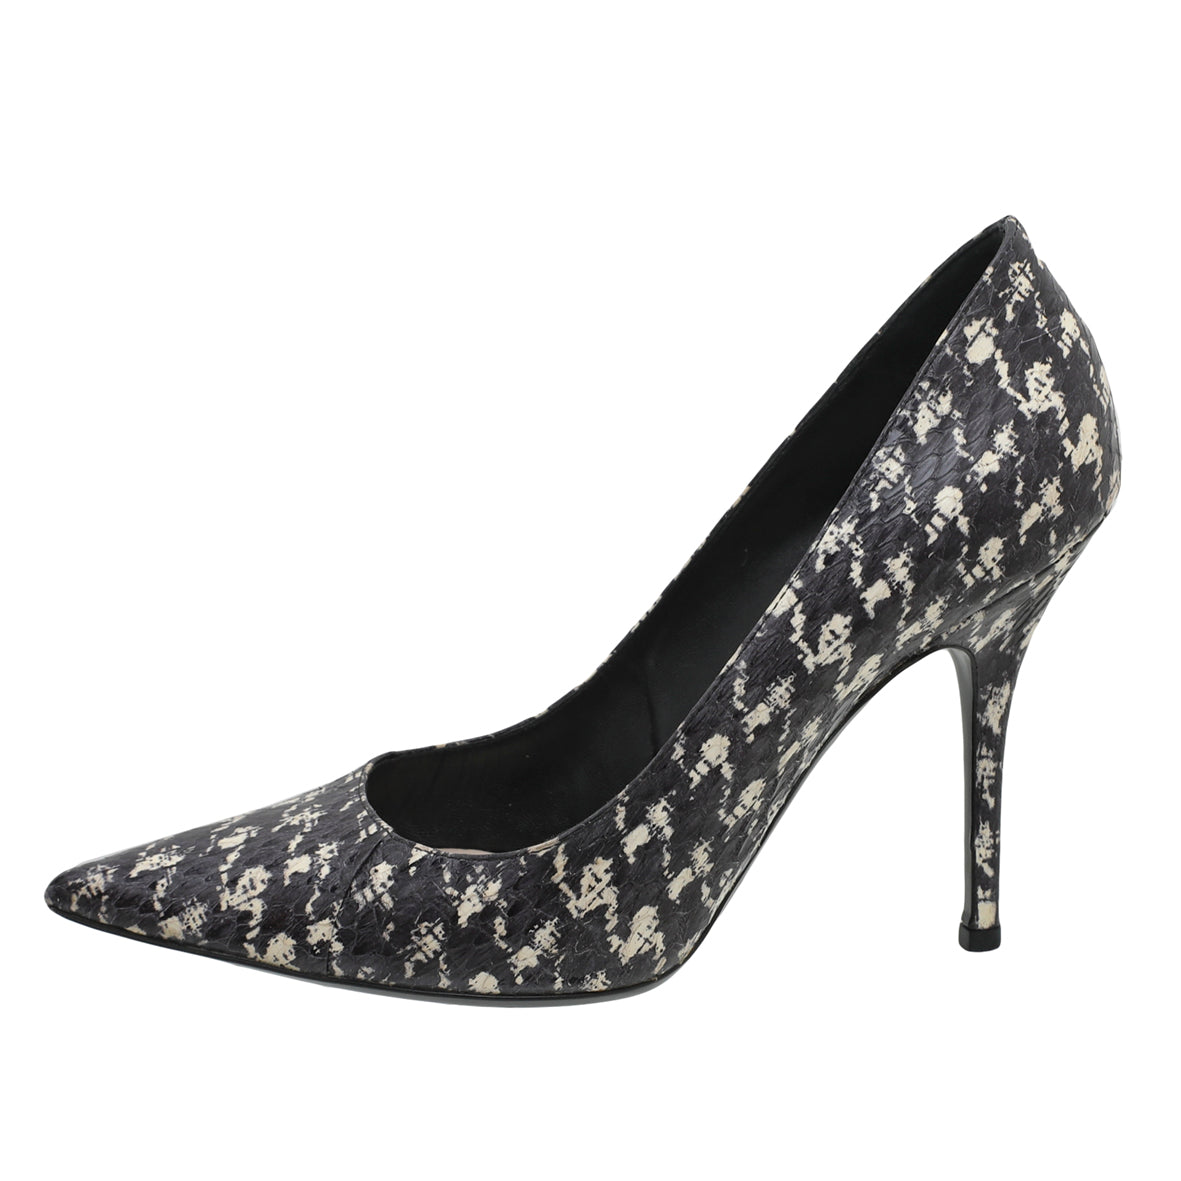 Christian Dior Bicolor Python Painted Cherie Pointed Pumps 38